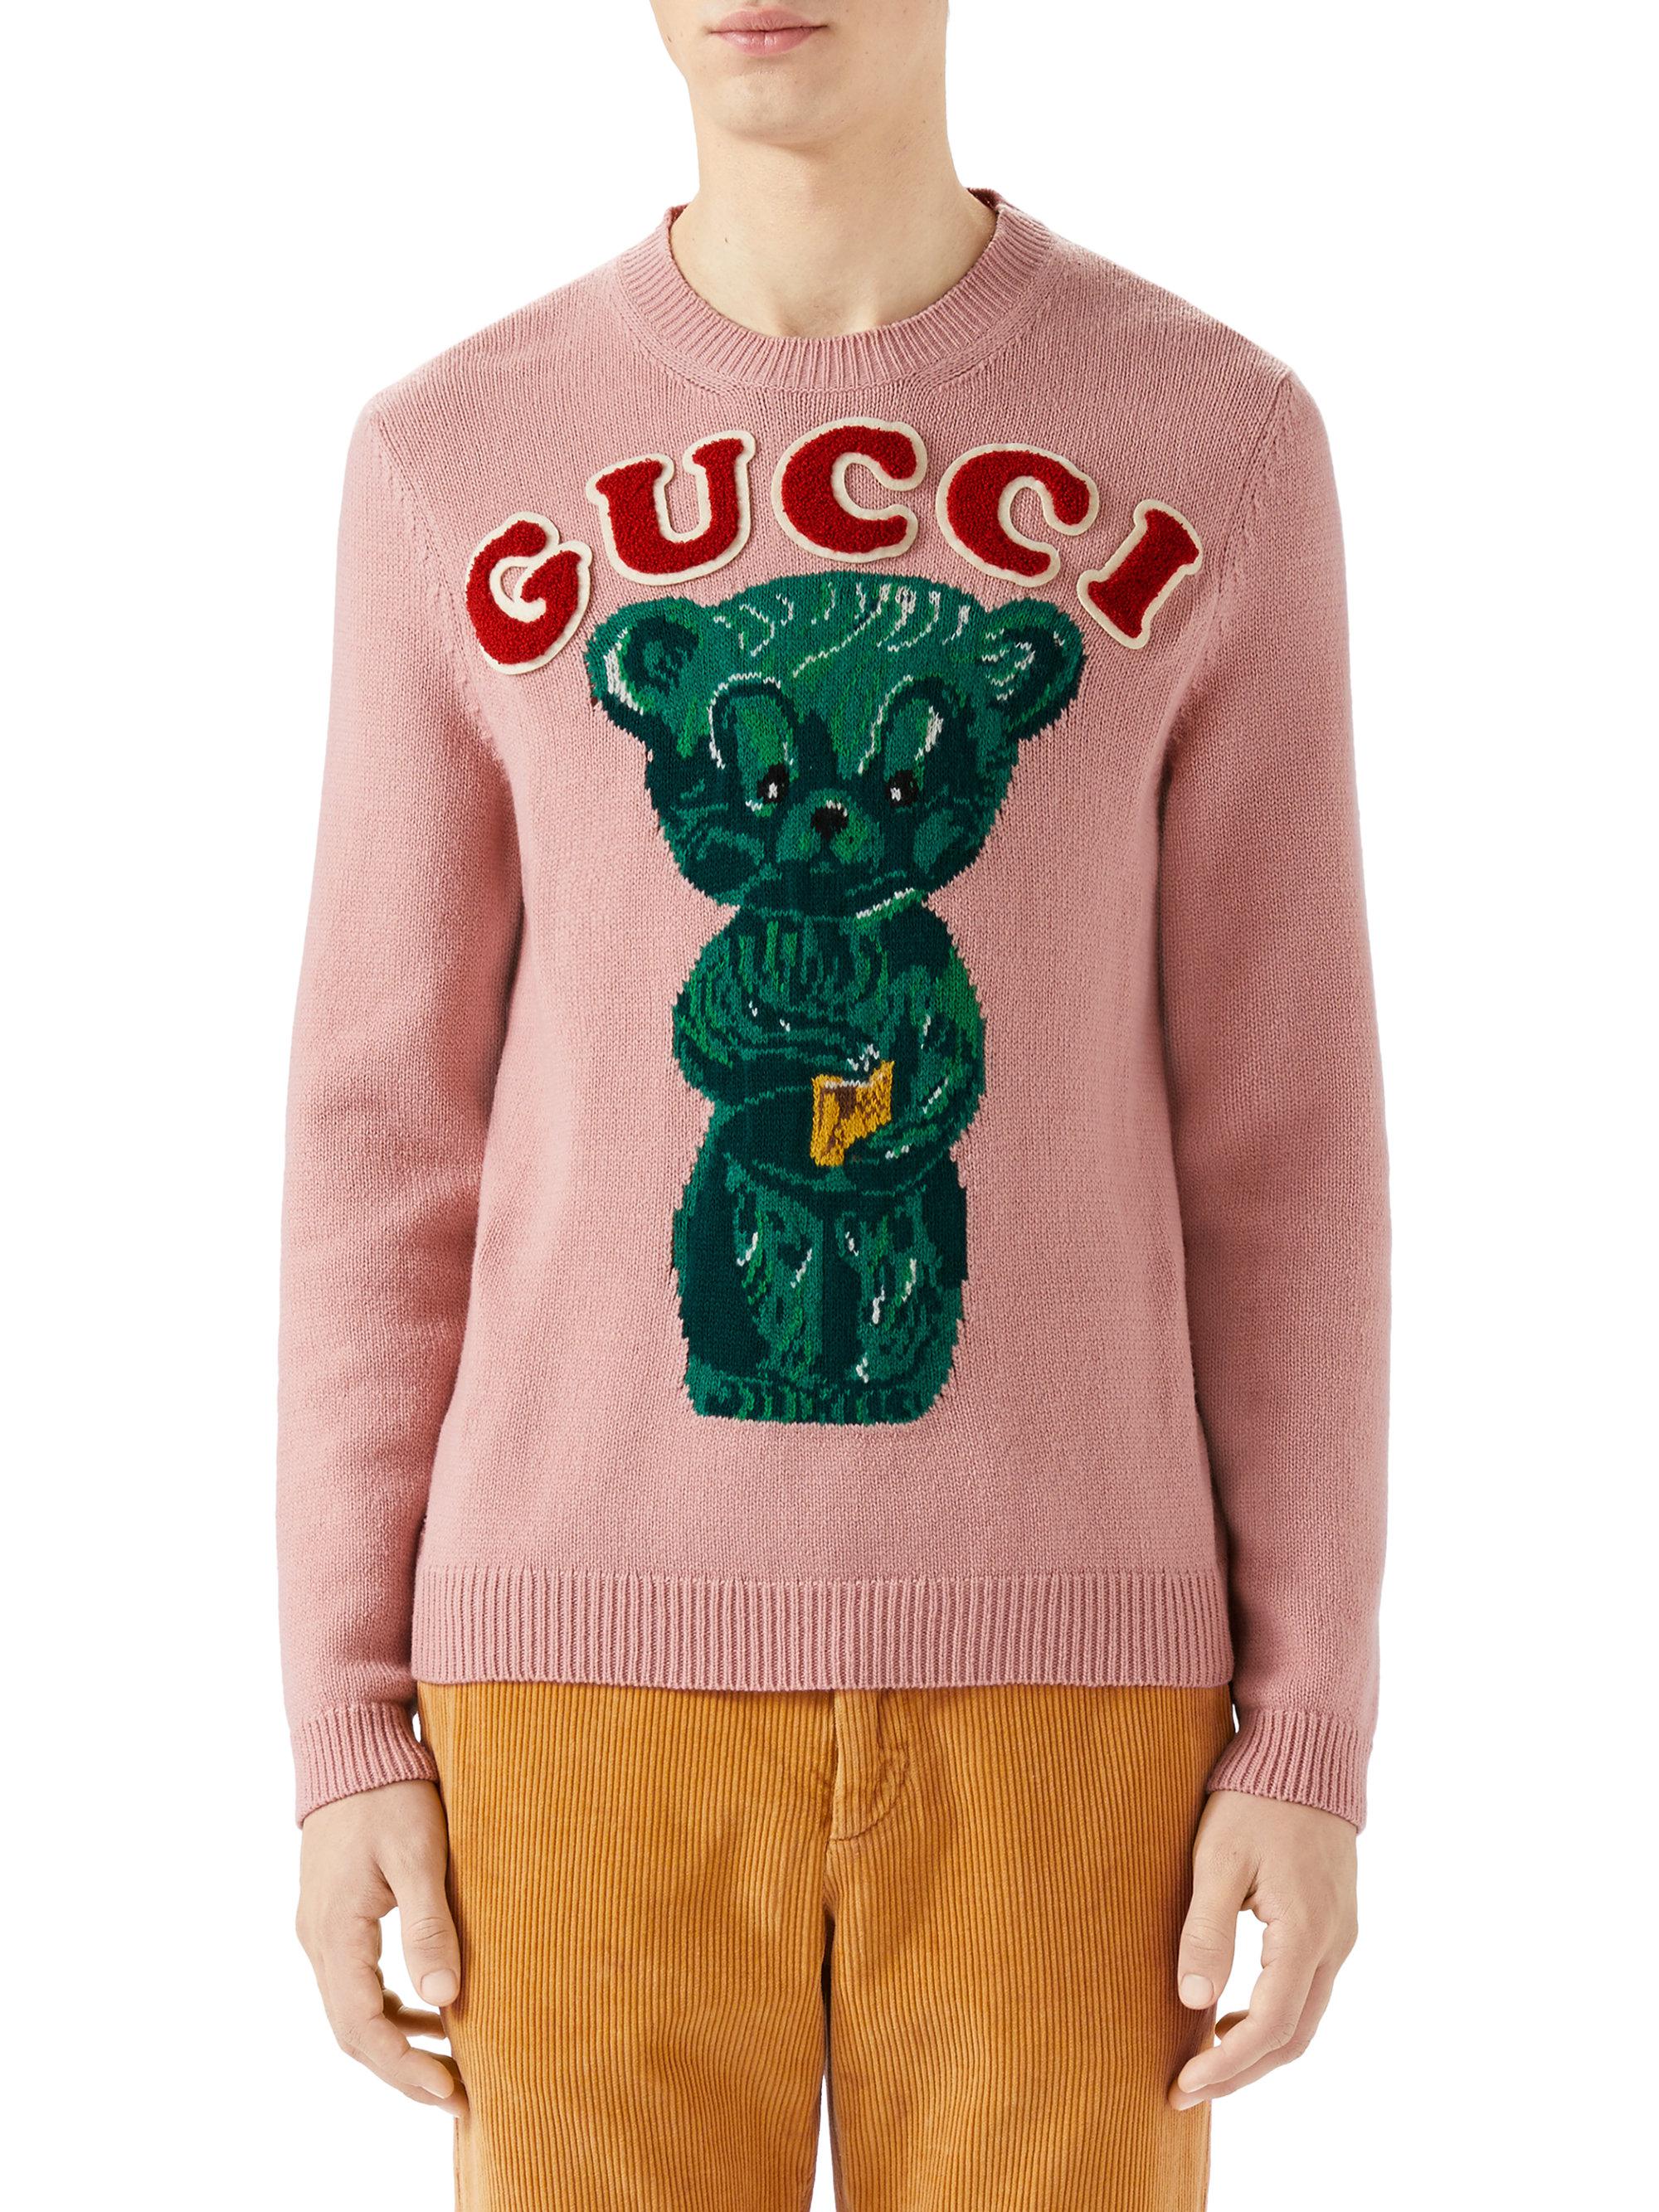 gucci sweater with green bear